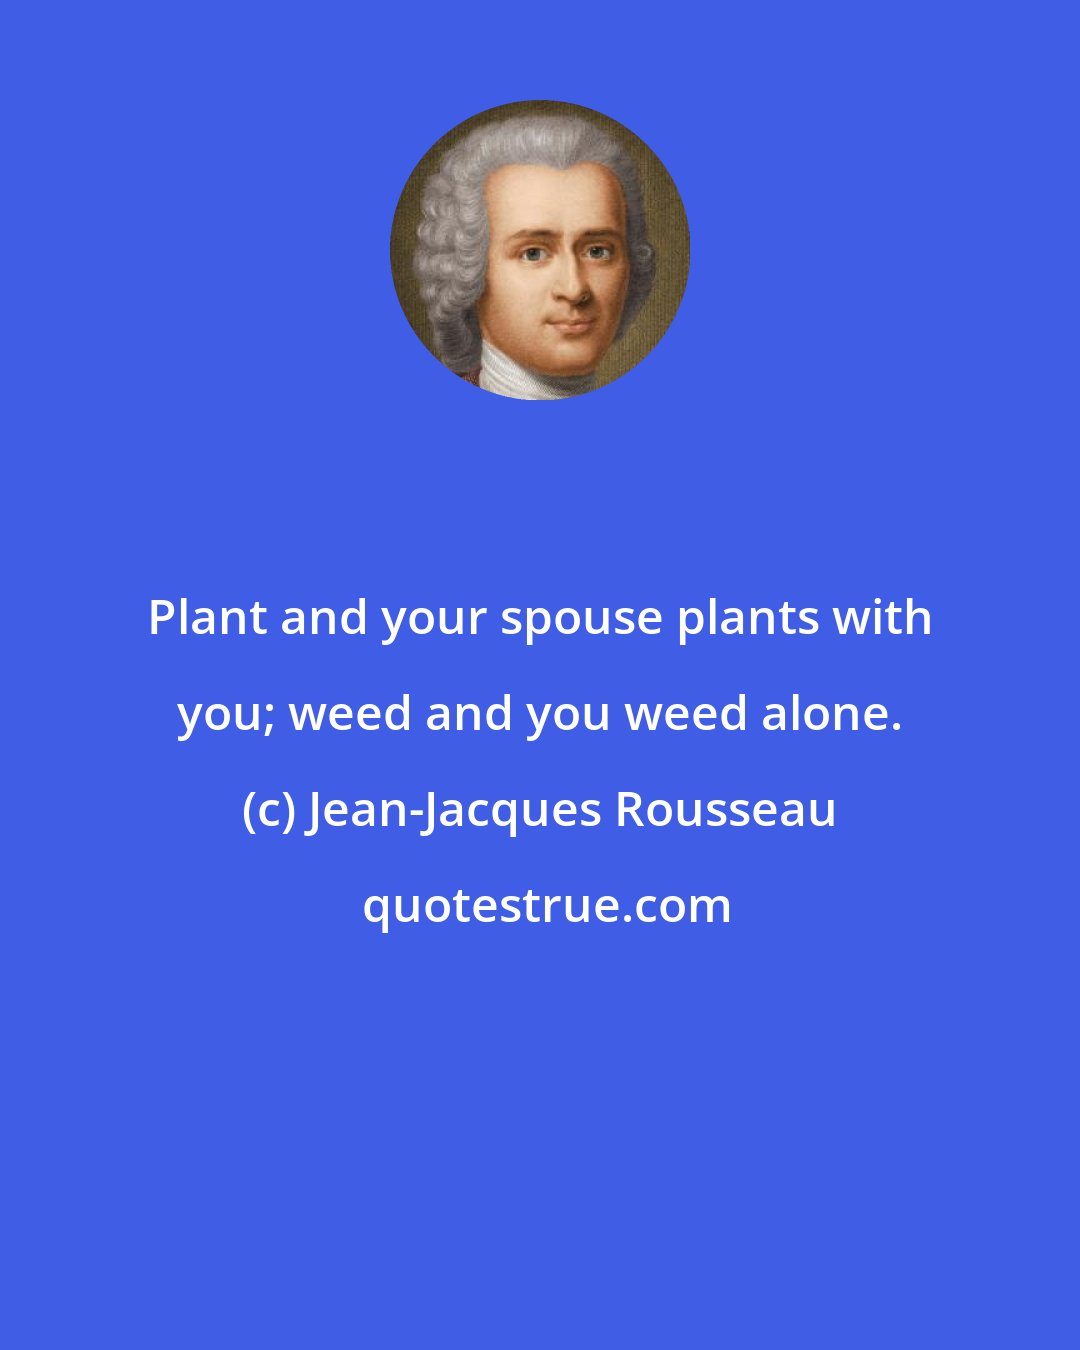 Jean-Jacques Rousseau: Plant and your spouse plants with you; weed and you weed alone.